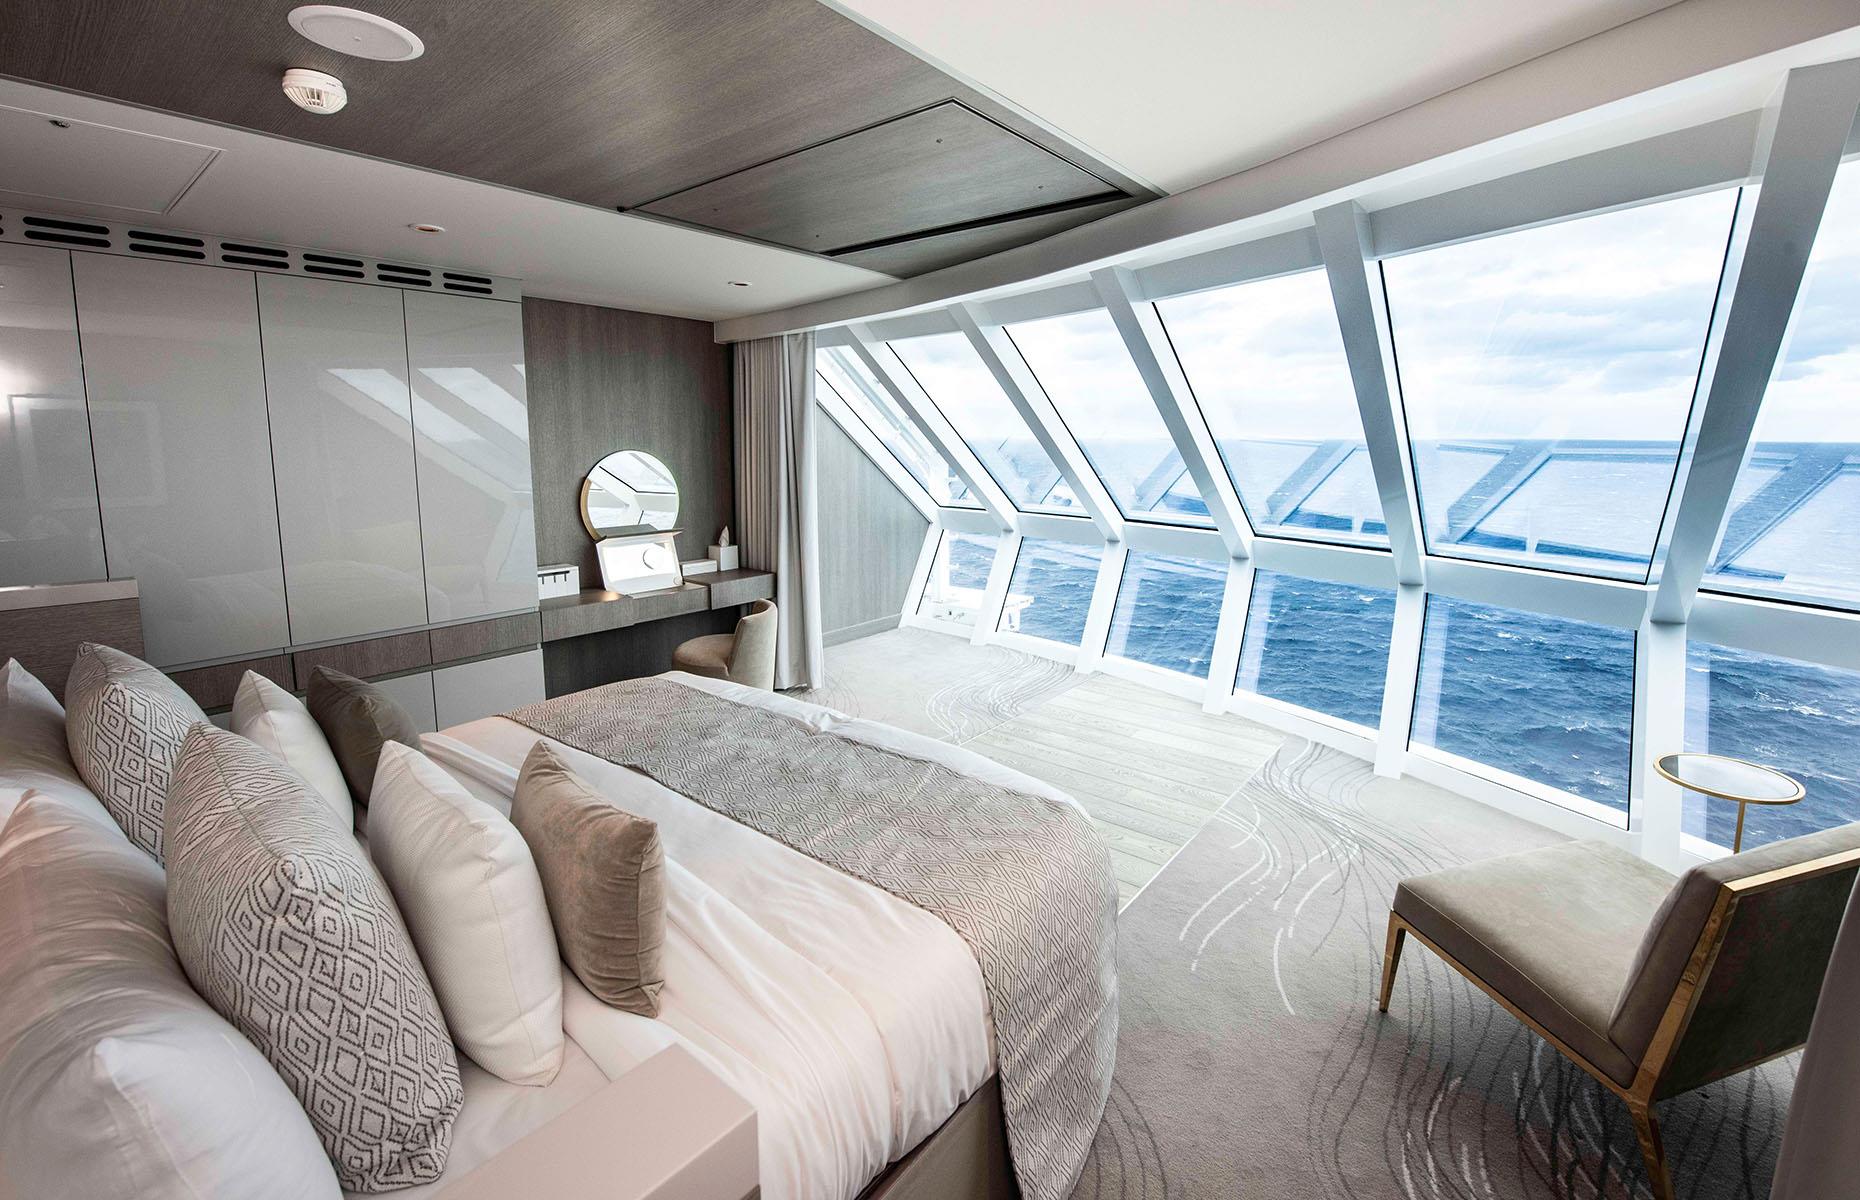 <p>The Iconic Suite is part of The Retreat, an exclusive area of the ship accessible to suite guests. It's home to a sundeck, restaurant and lounge where your butler, along with a team of attendants and concierges, will cater to your every whim. In 2024, Celebrity Edge will visit Hawaii, Alaska, Tahiti and New Zealand and also take in Australia's wine country. A stay in an Iconic Suite on a 13-night cruise around New Zealand costs from around £22,500 ($28.3k) per person.</p>